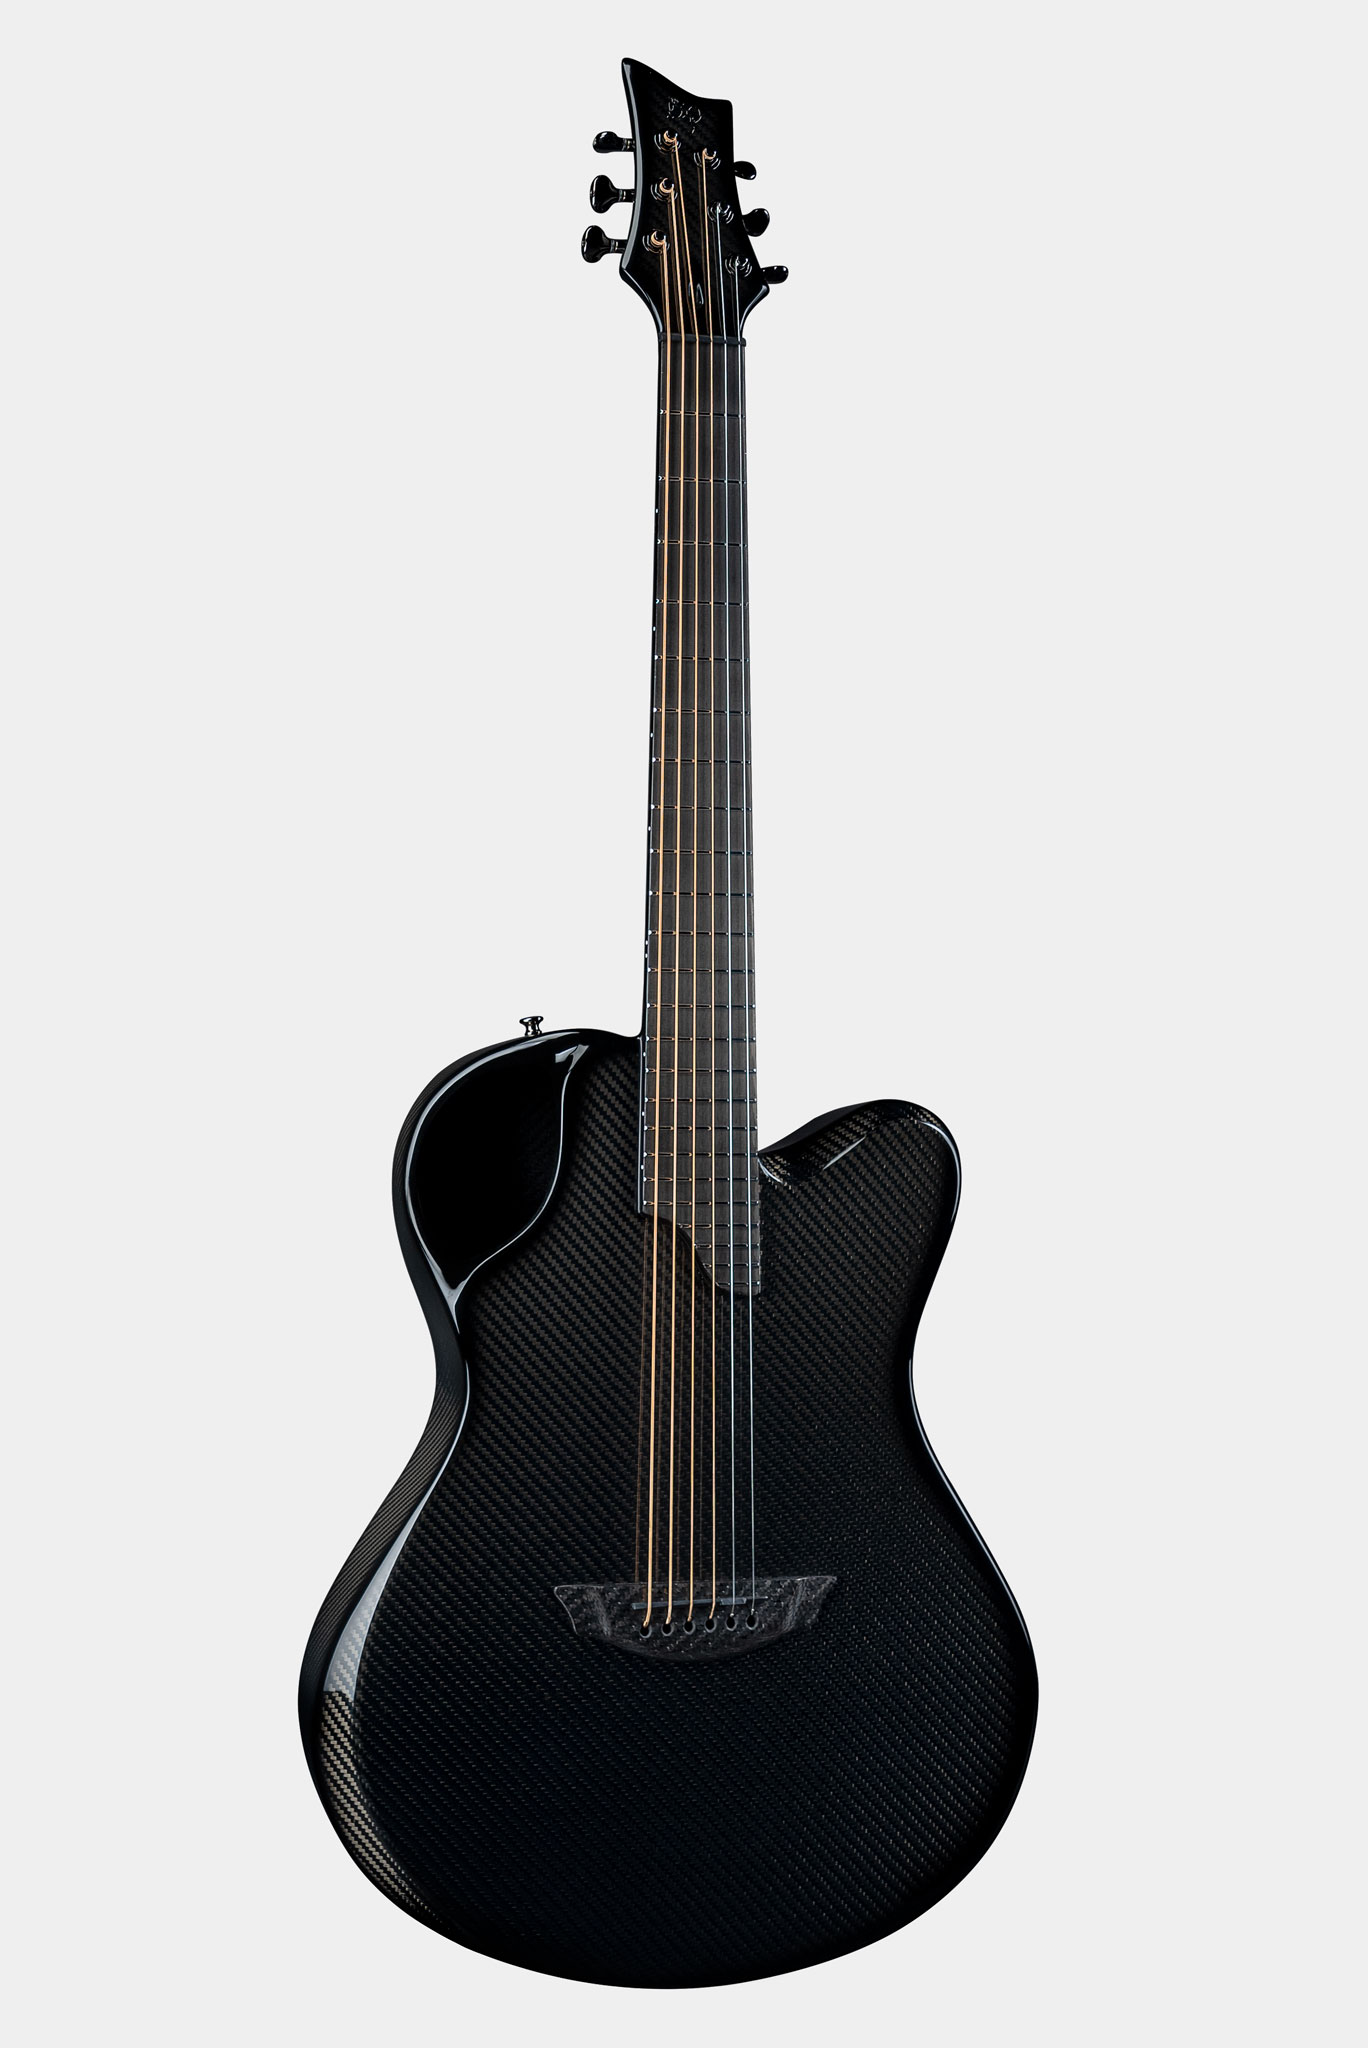 Emerald Guitars X20 model in sleek black carbon fiber finish with Gotoh 510 tuners and pinless carbon bridge